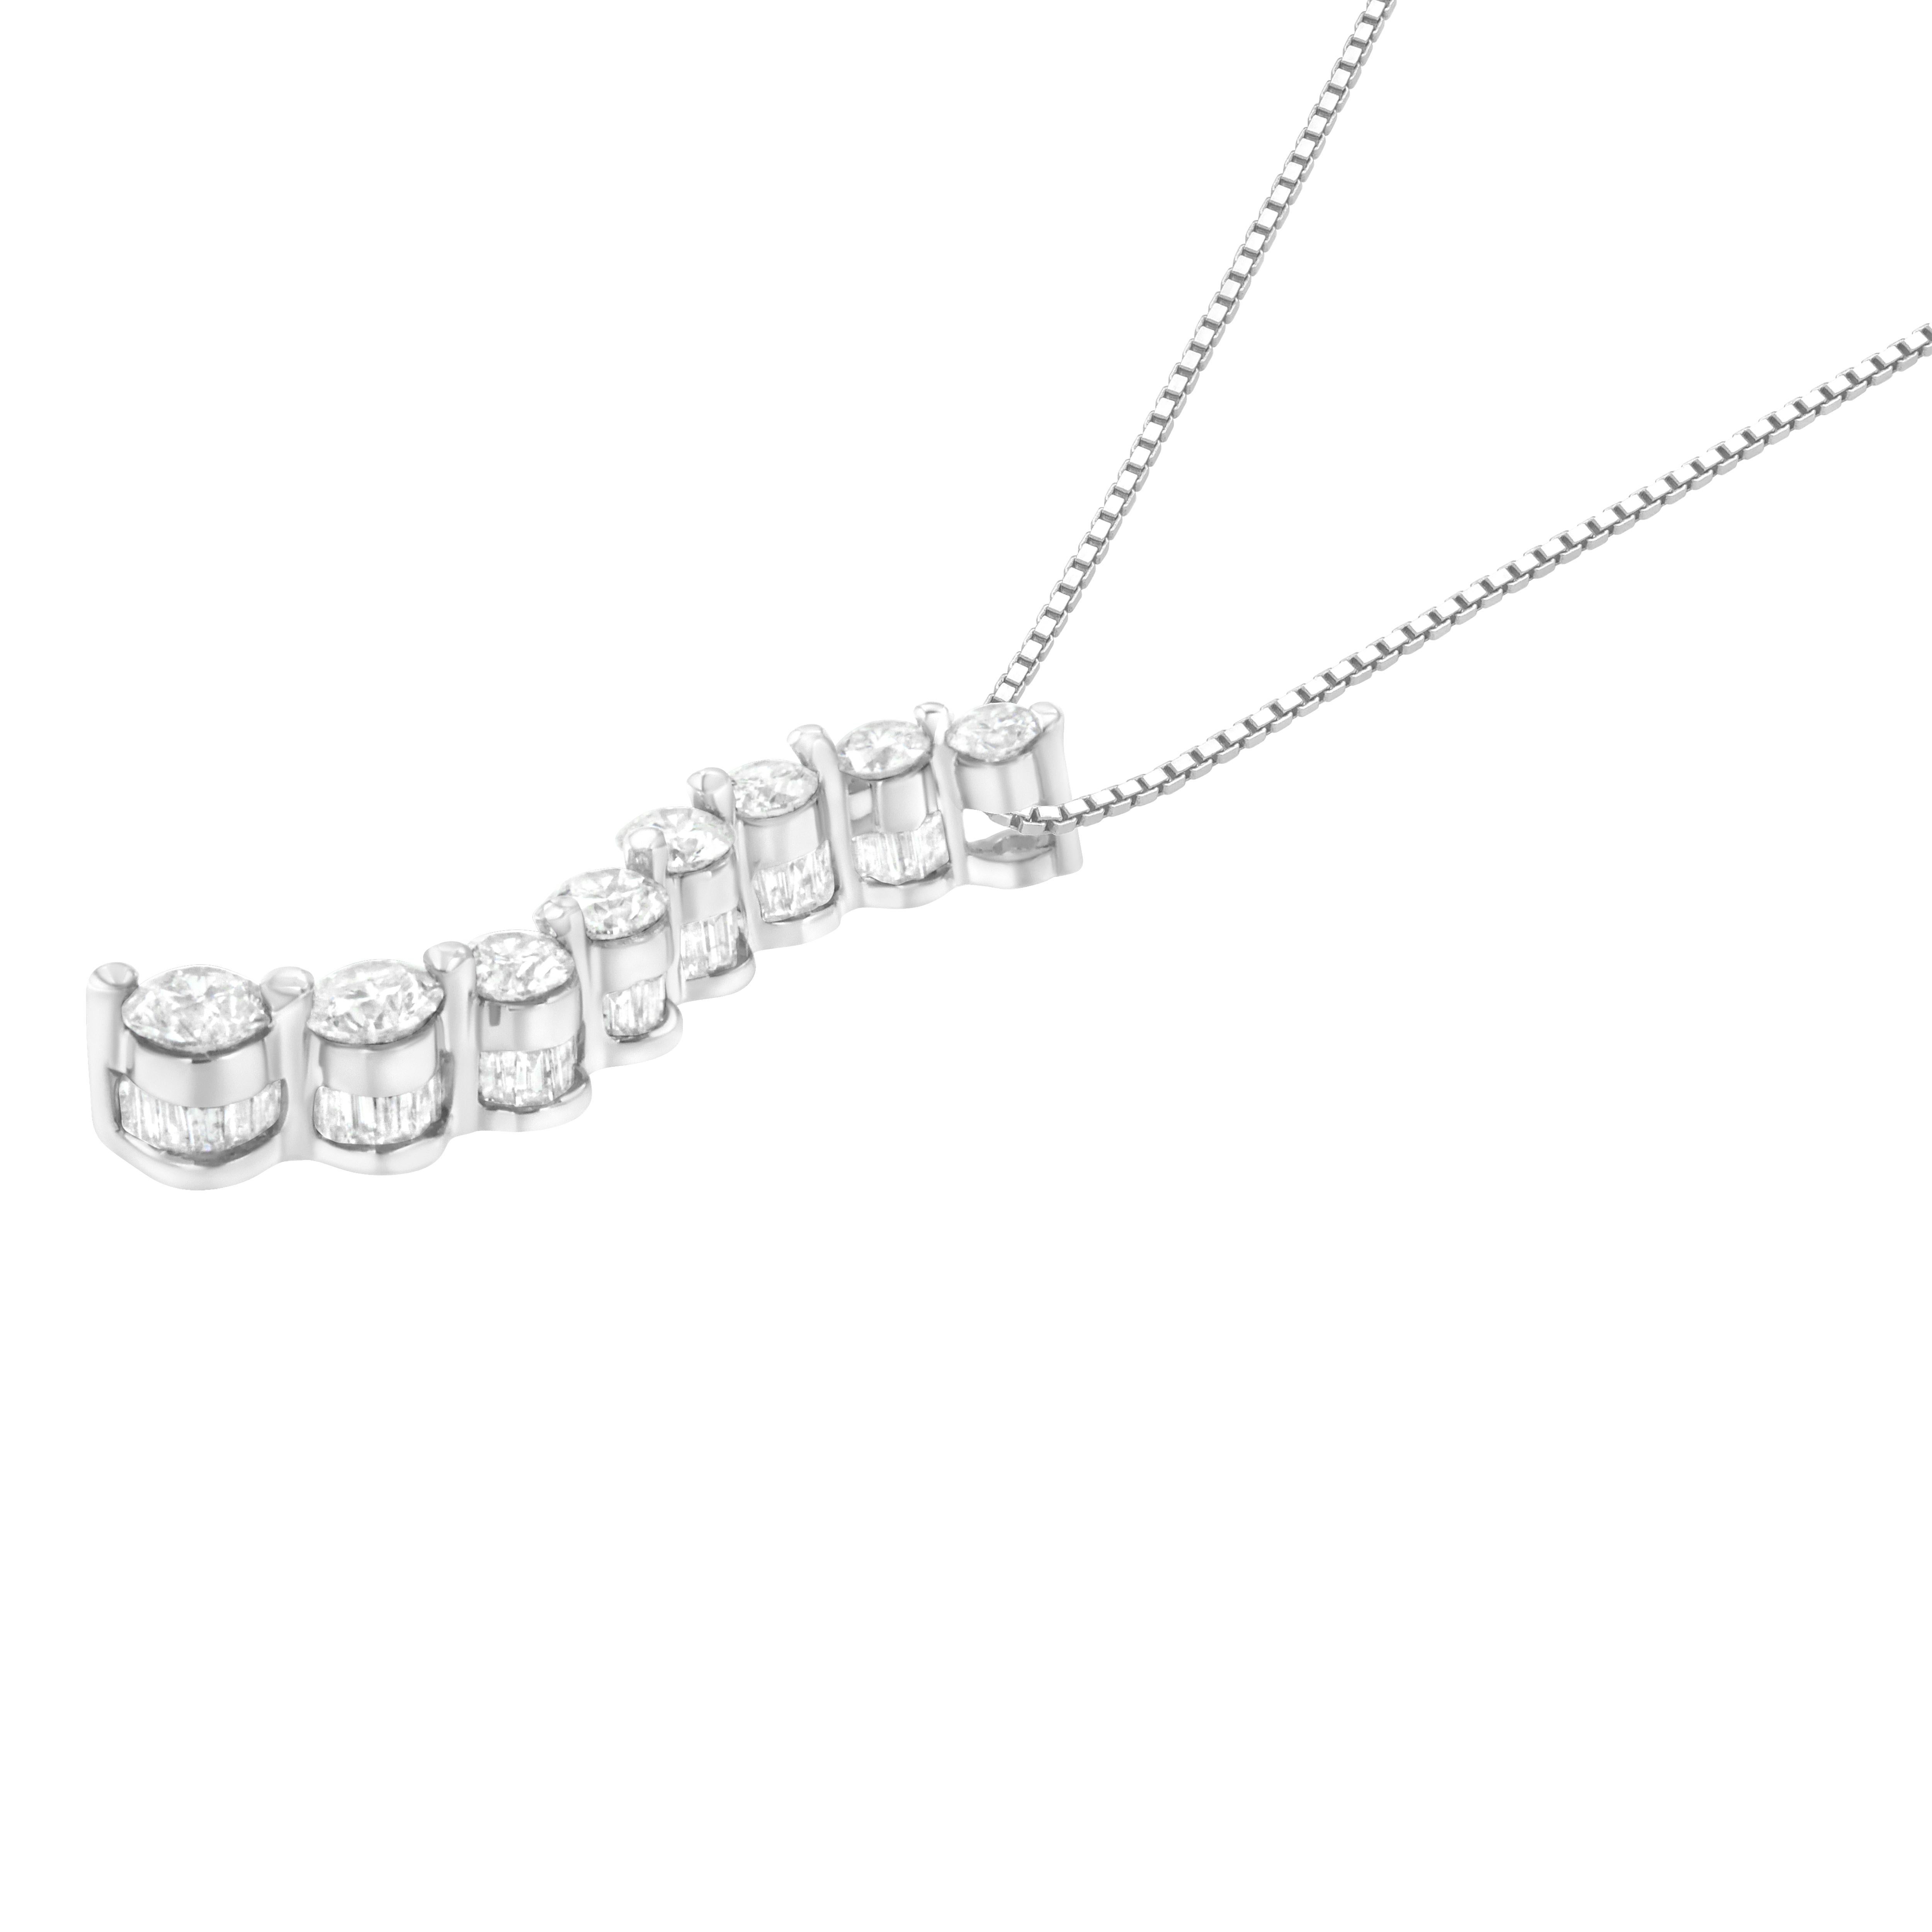 Contemporary AGS Certified 14K White Gold 3.0 Carat Diamond Journey Pendant Necklace For Sale